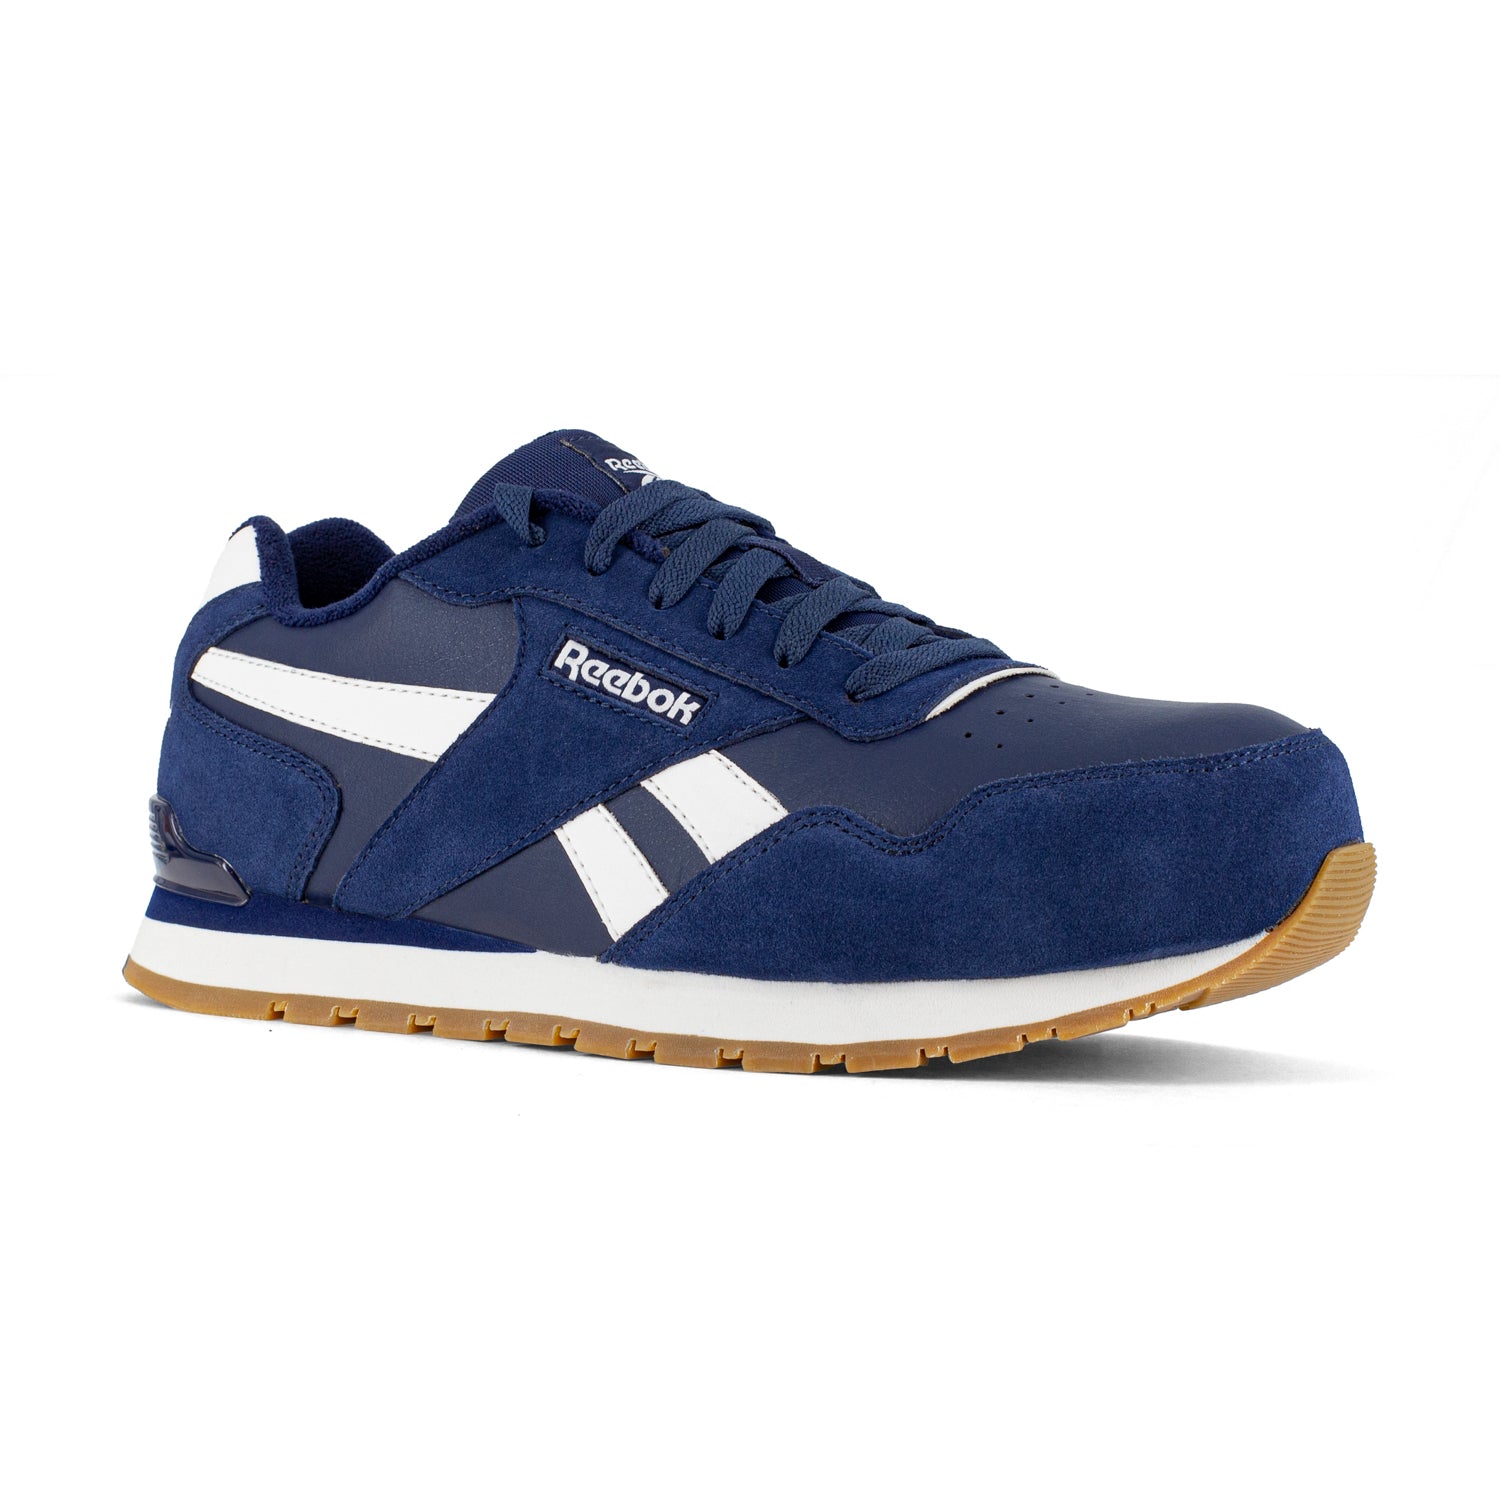 ouder Vernederen jacht Reebok Mens Navy/White Leather Work Shoes Harman Classic Sneaker CT – The  Western Company